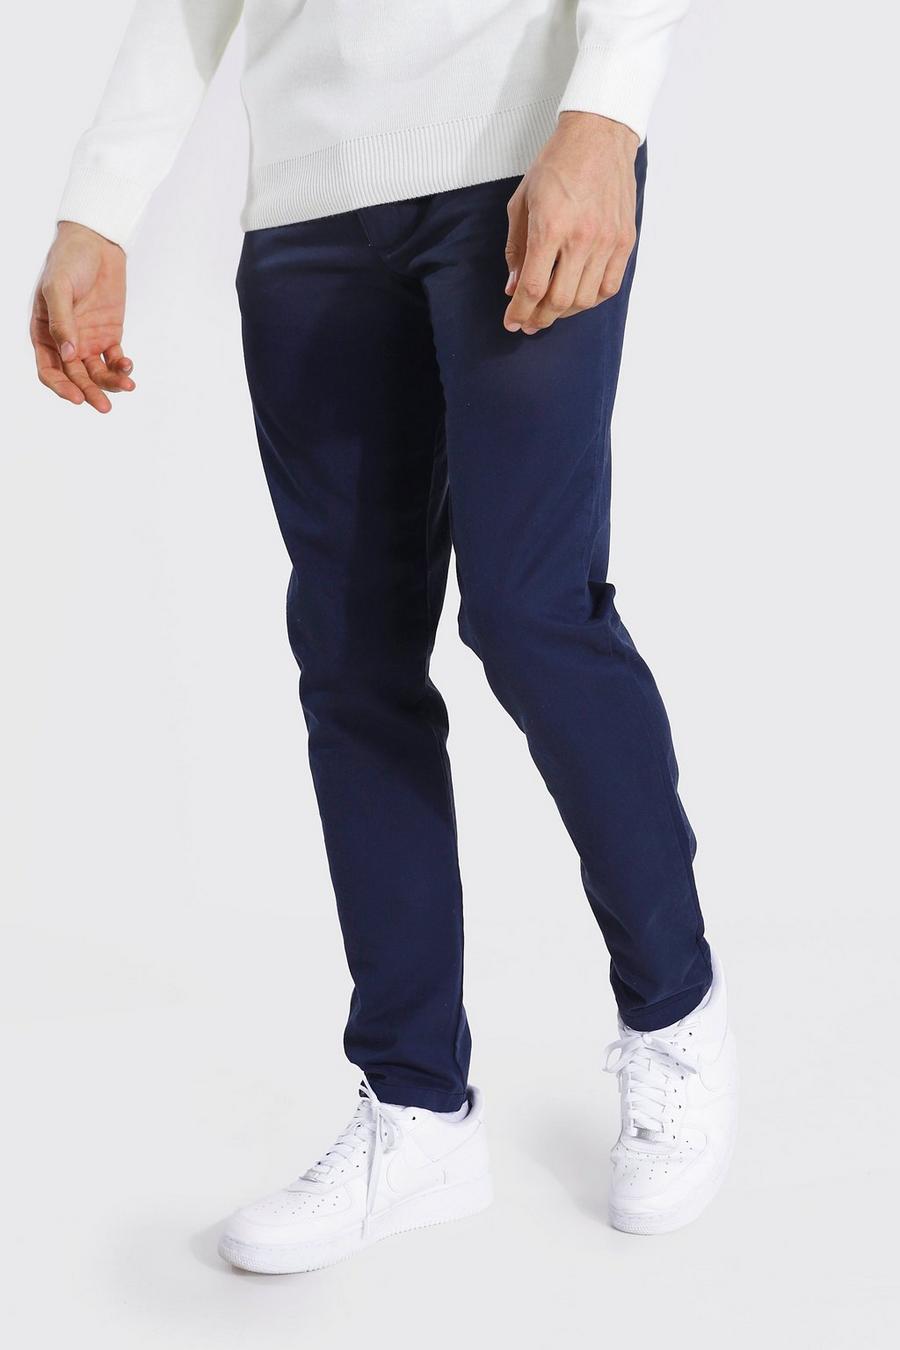 Navy Tall Slim Fit Chino Trouser